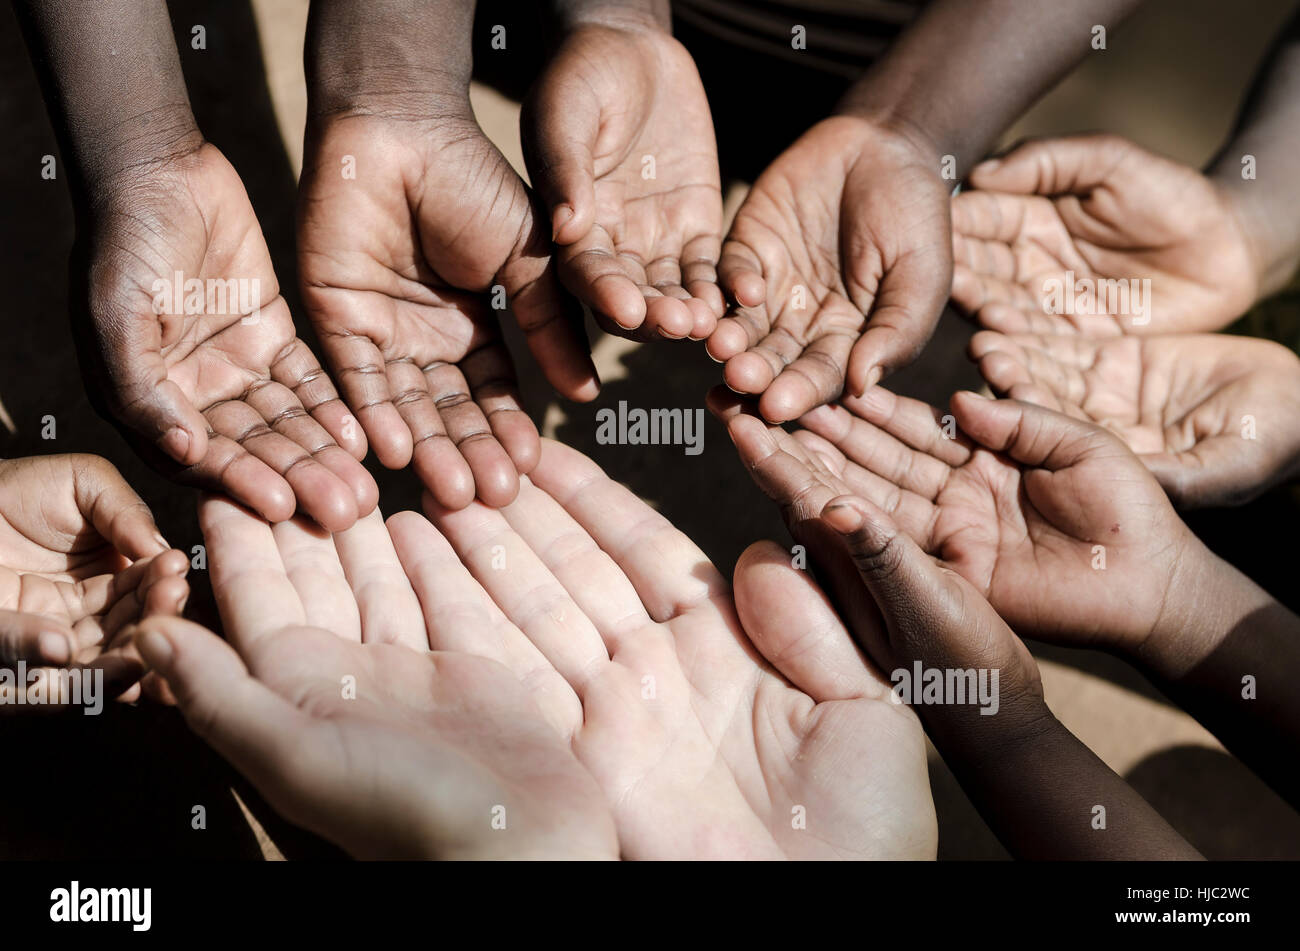 Caucasian and African Ethnicity Hands Asking for Help Symbol Stock Photo